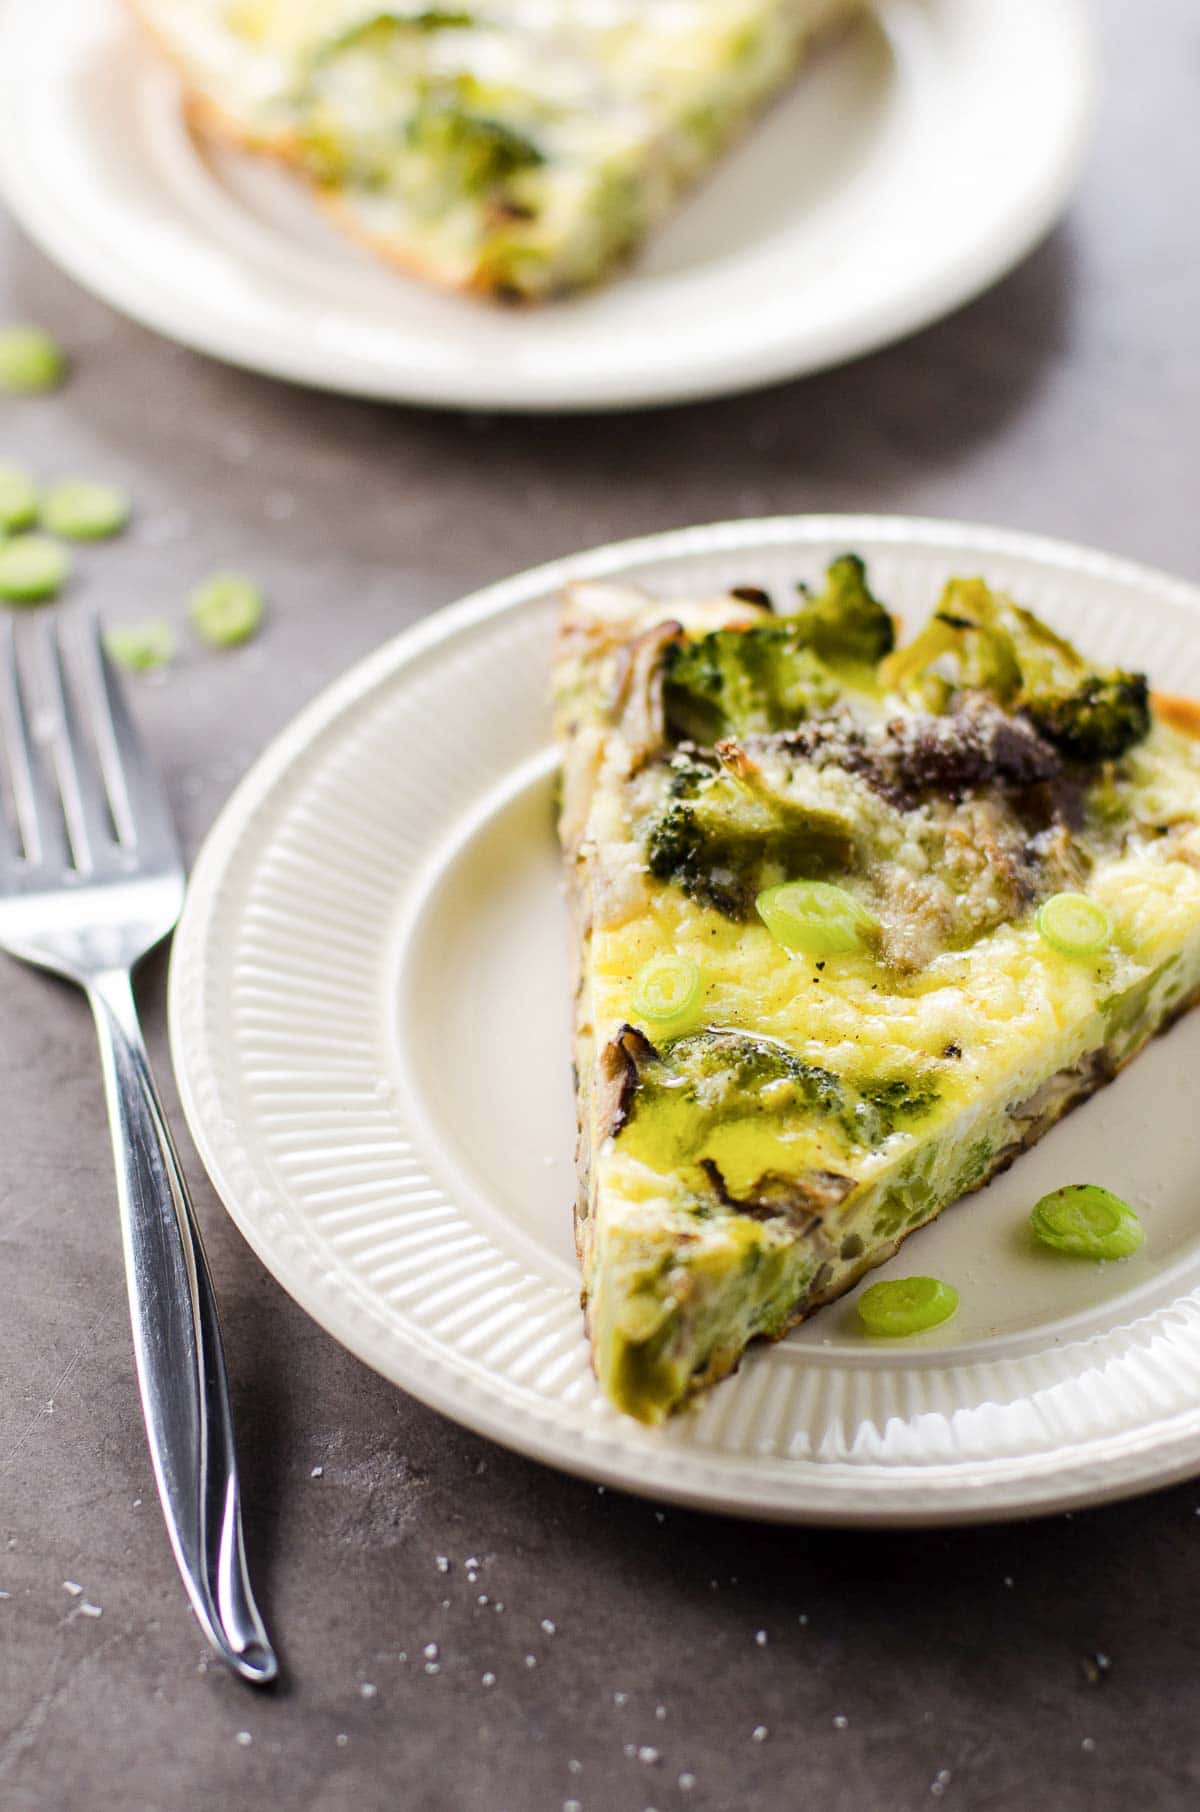 a slice of broccoli mushroom frittata on a plate with a fork